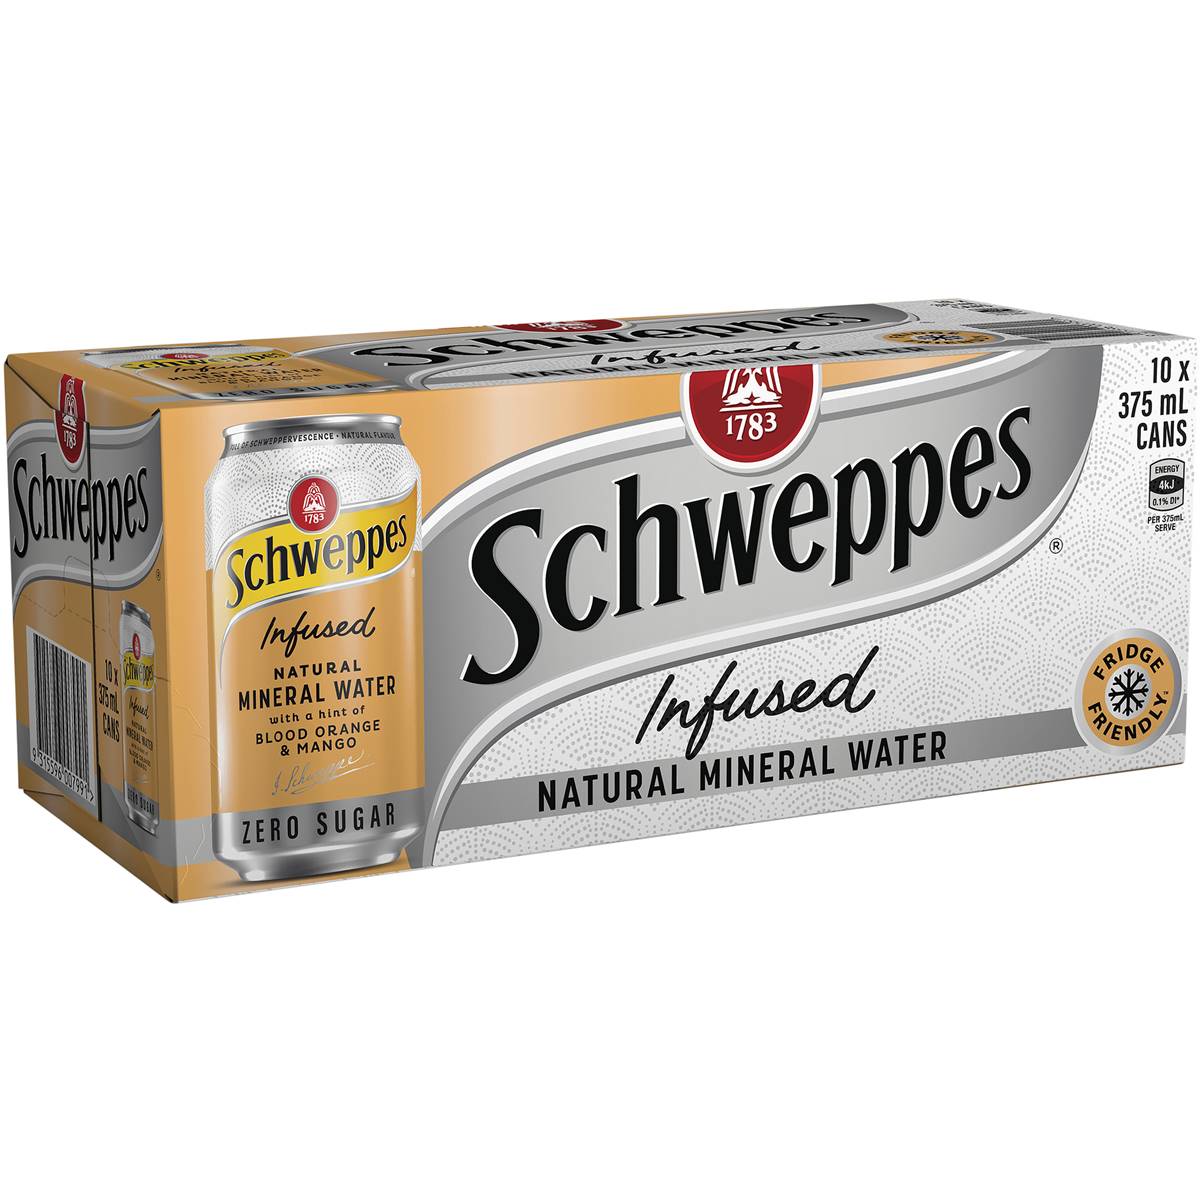 Schweppes Blood Orange Mango Infused Mineral Water Cans 12x375ml